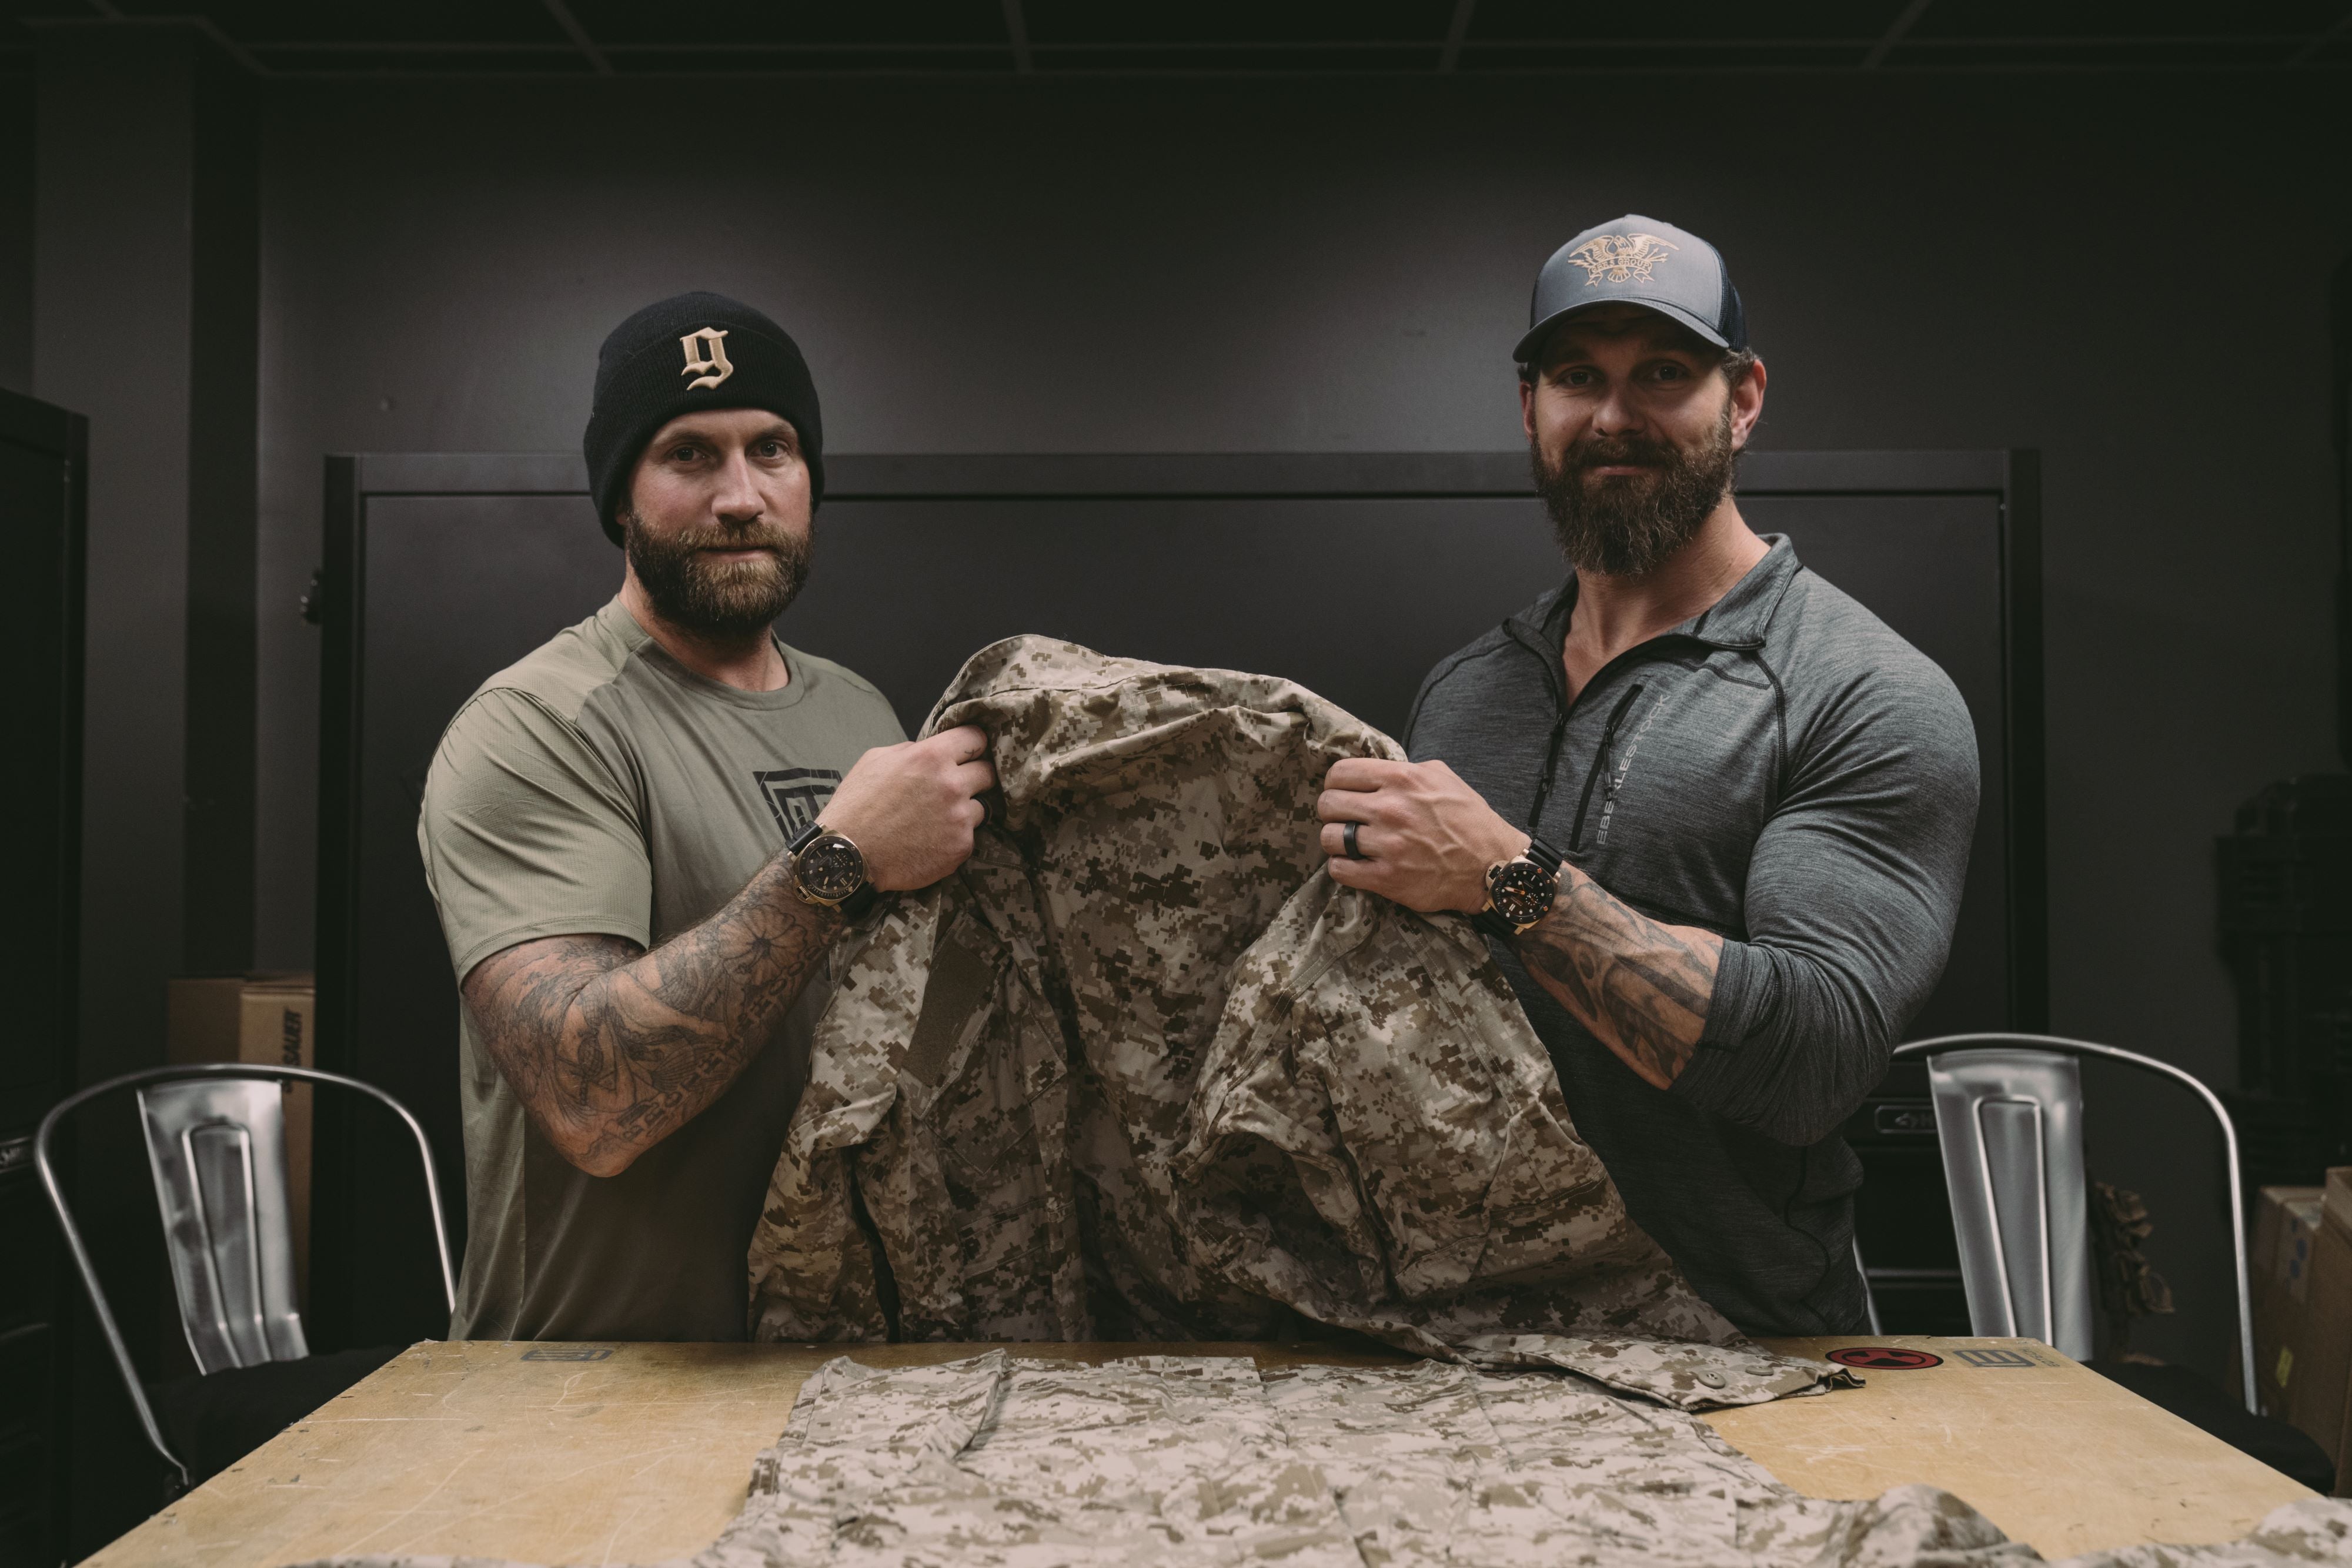 Raptor Tactical Nalgene Bottle Cover Prototypes - Soldier Systems Daily